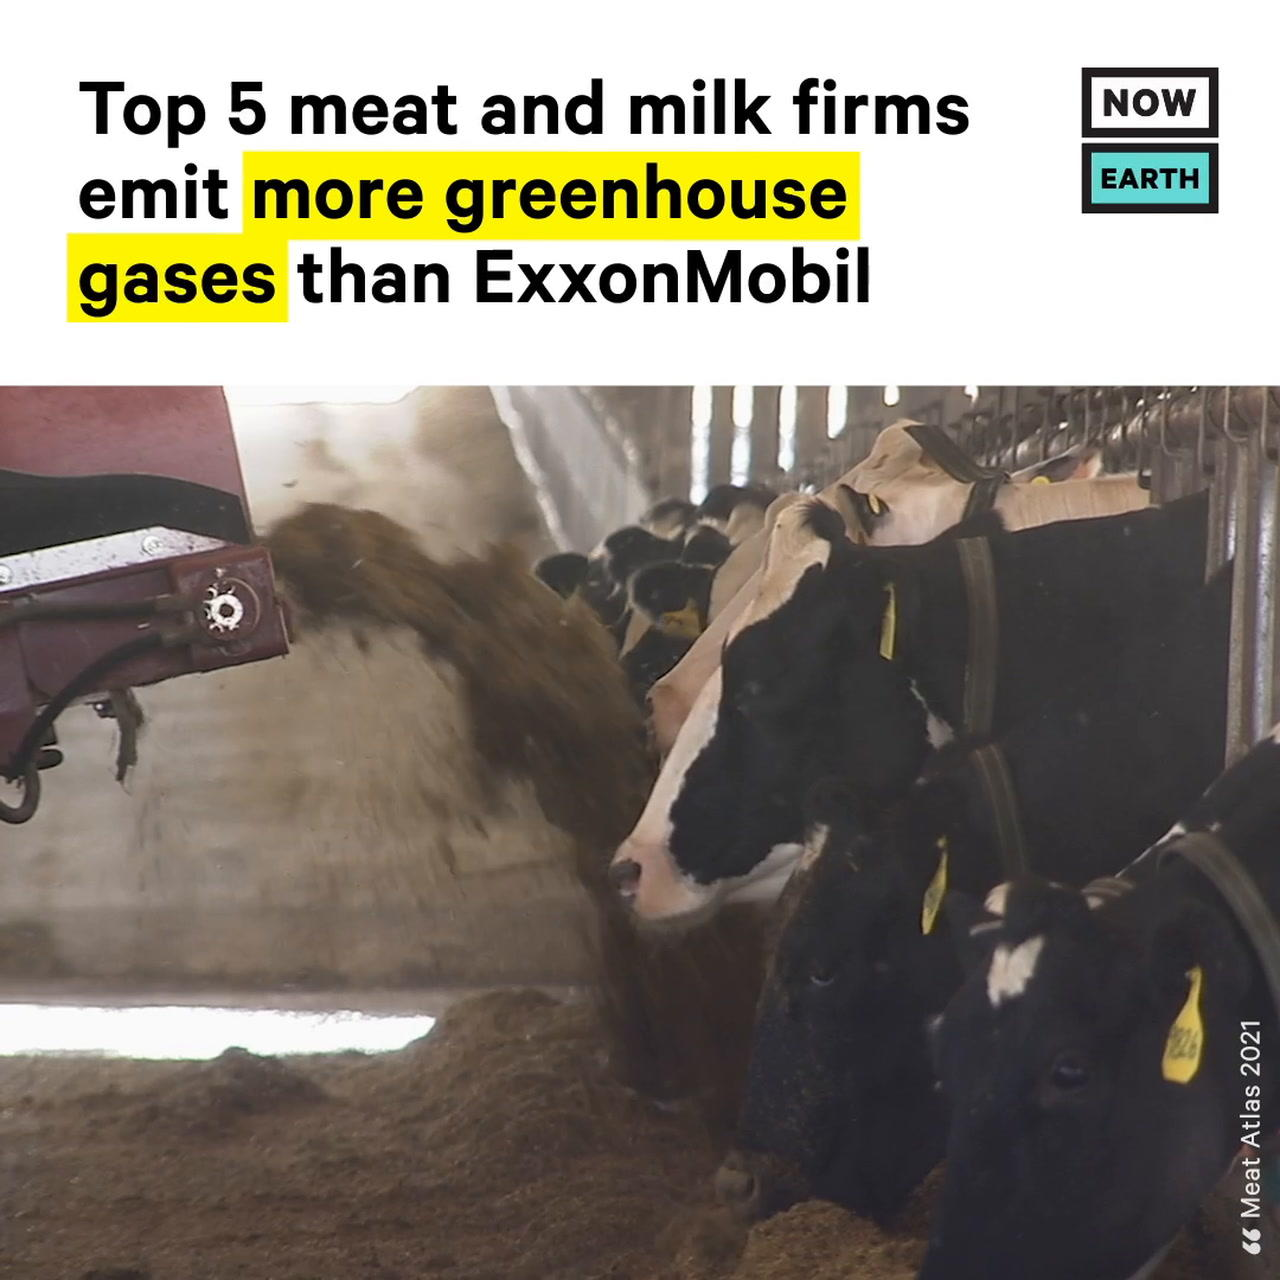 Top 5 Meat & Milk Companies Produce More Emissions Than ExxonMobil